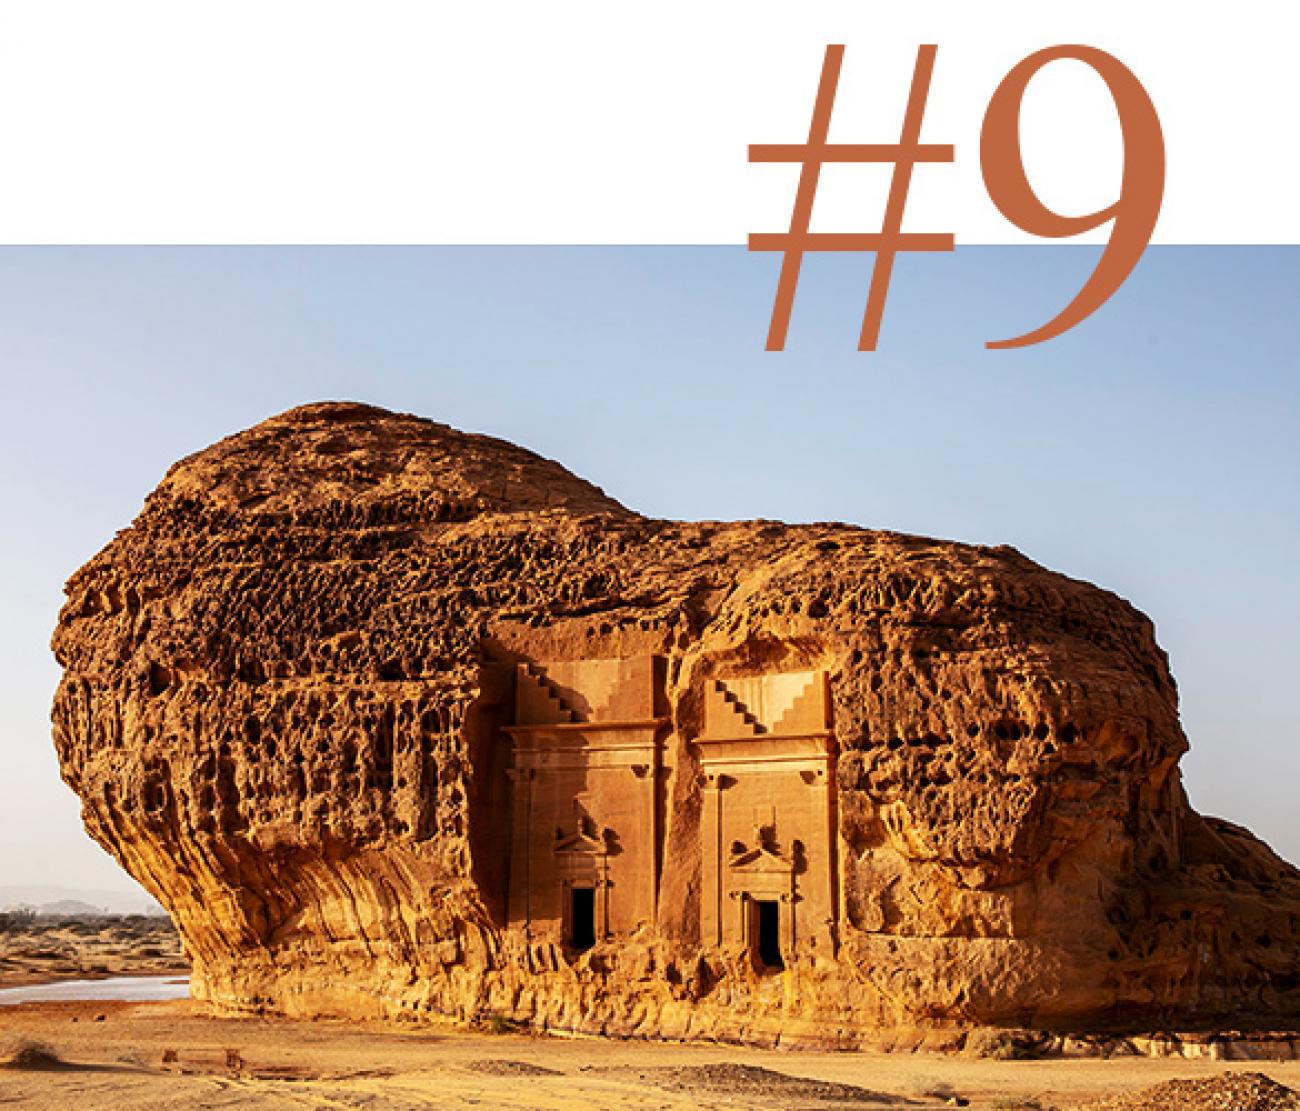 January is a great time to visit in January, see AlUla when it is cooler